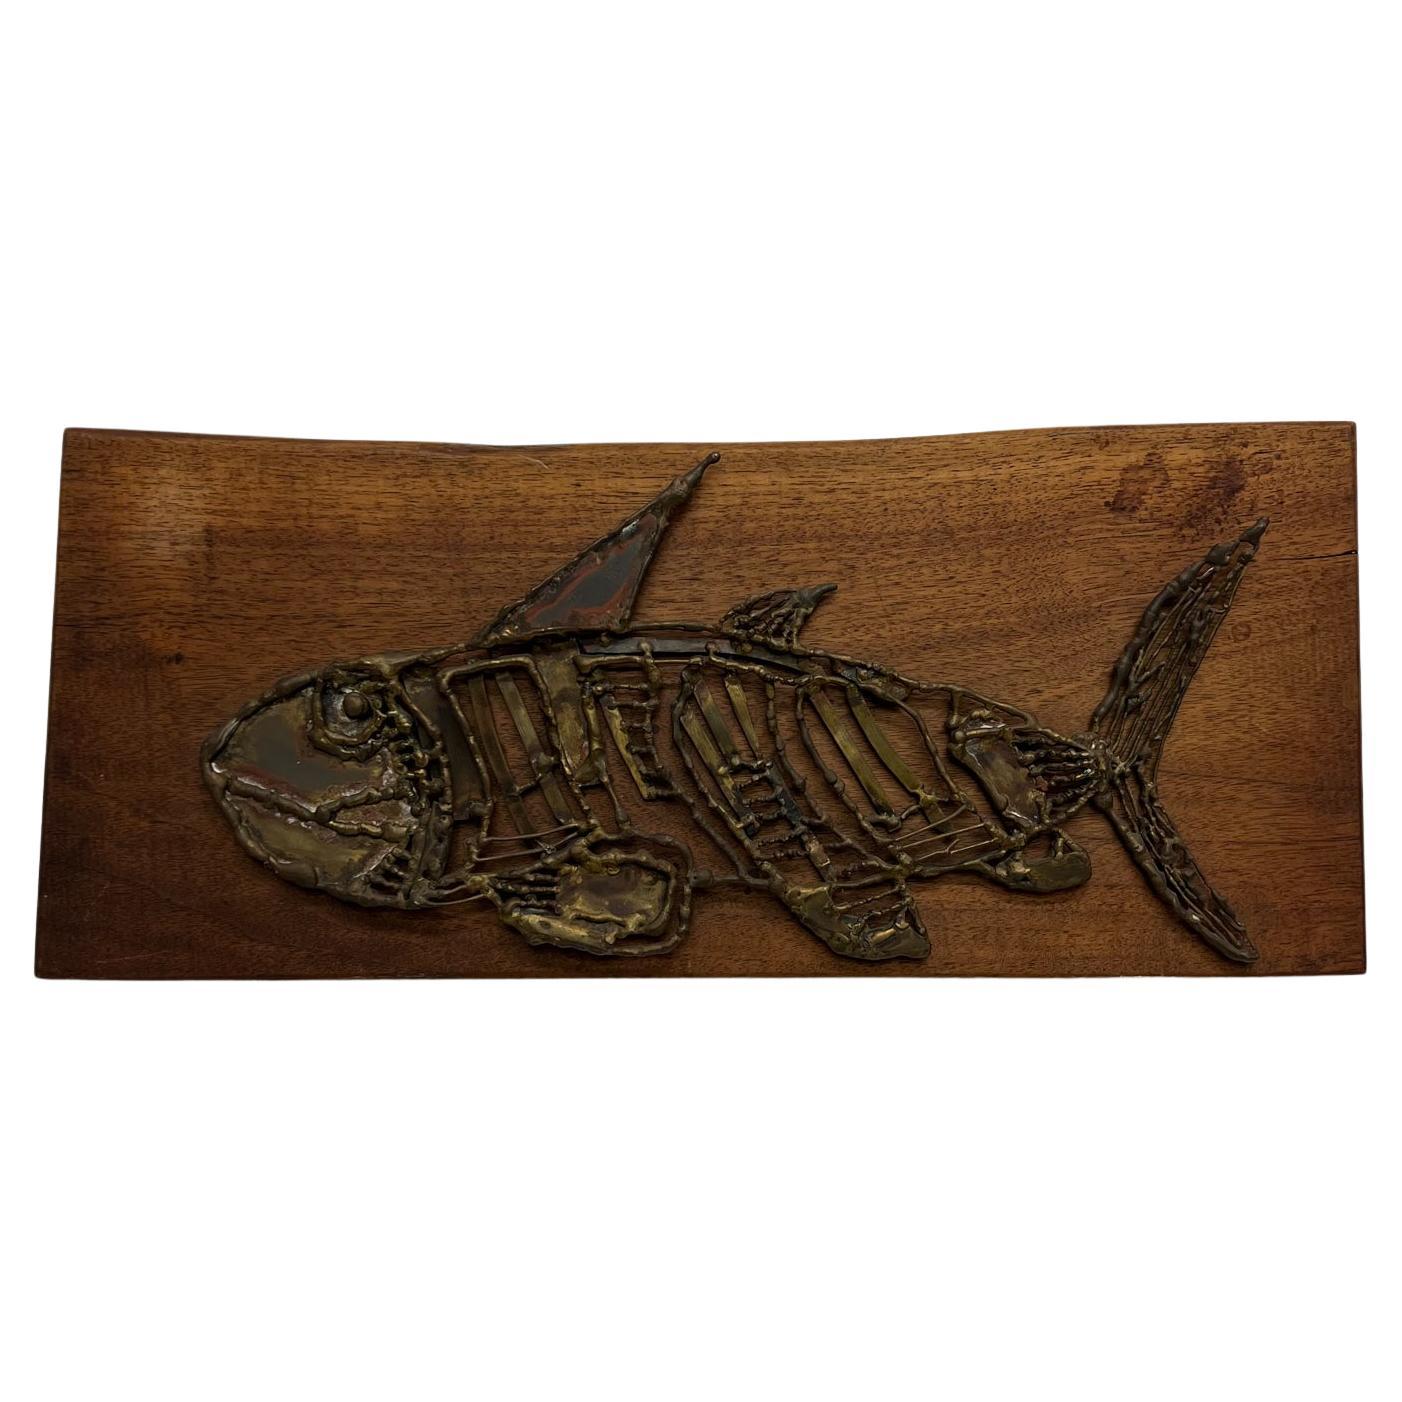 1970s Modern Brutalist wall art bronzed metal fish on wood plaque
18.5 w x 8 h x 1.5 d
Original preowned unrestored vintage condition.
See images provided please.
 